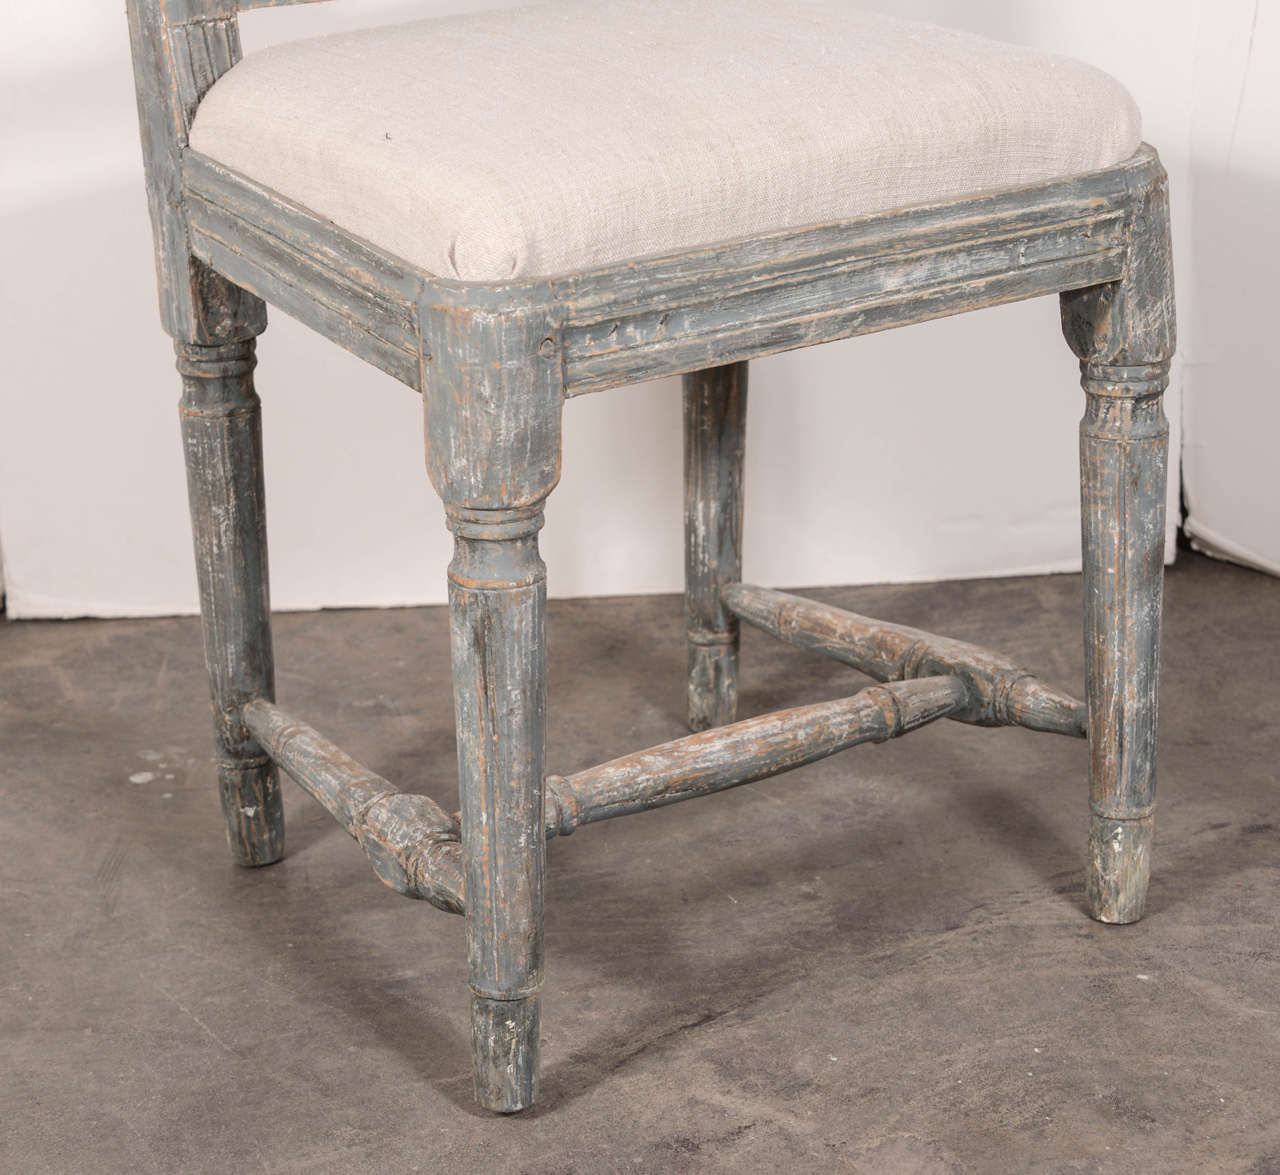 Swedish Gustavian Blue Painted Slat Back Dining Chairs from circa 1790 For Sale 3